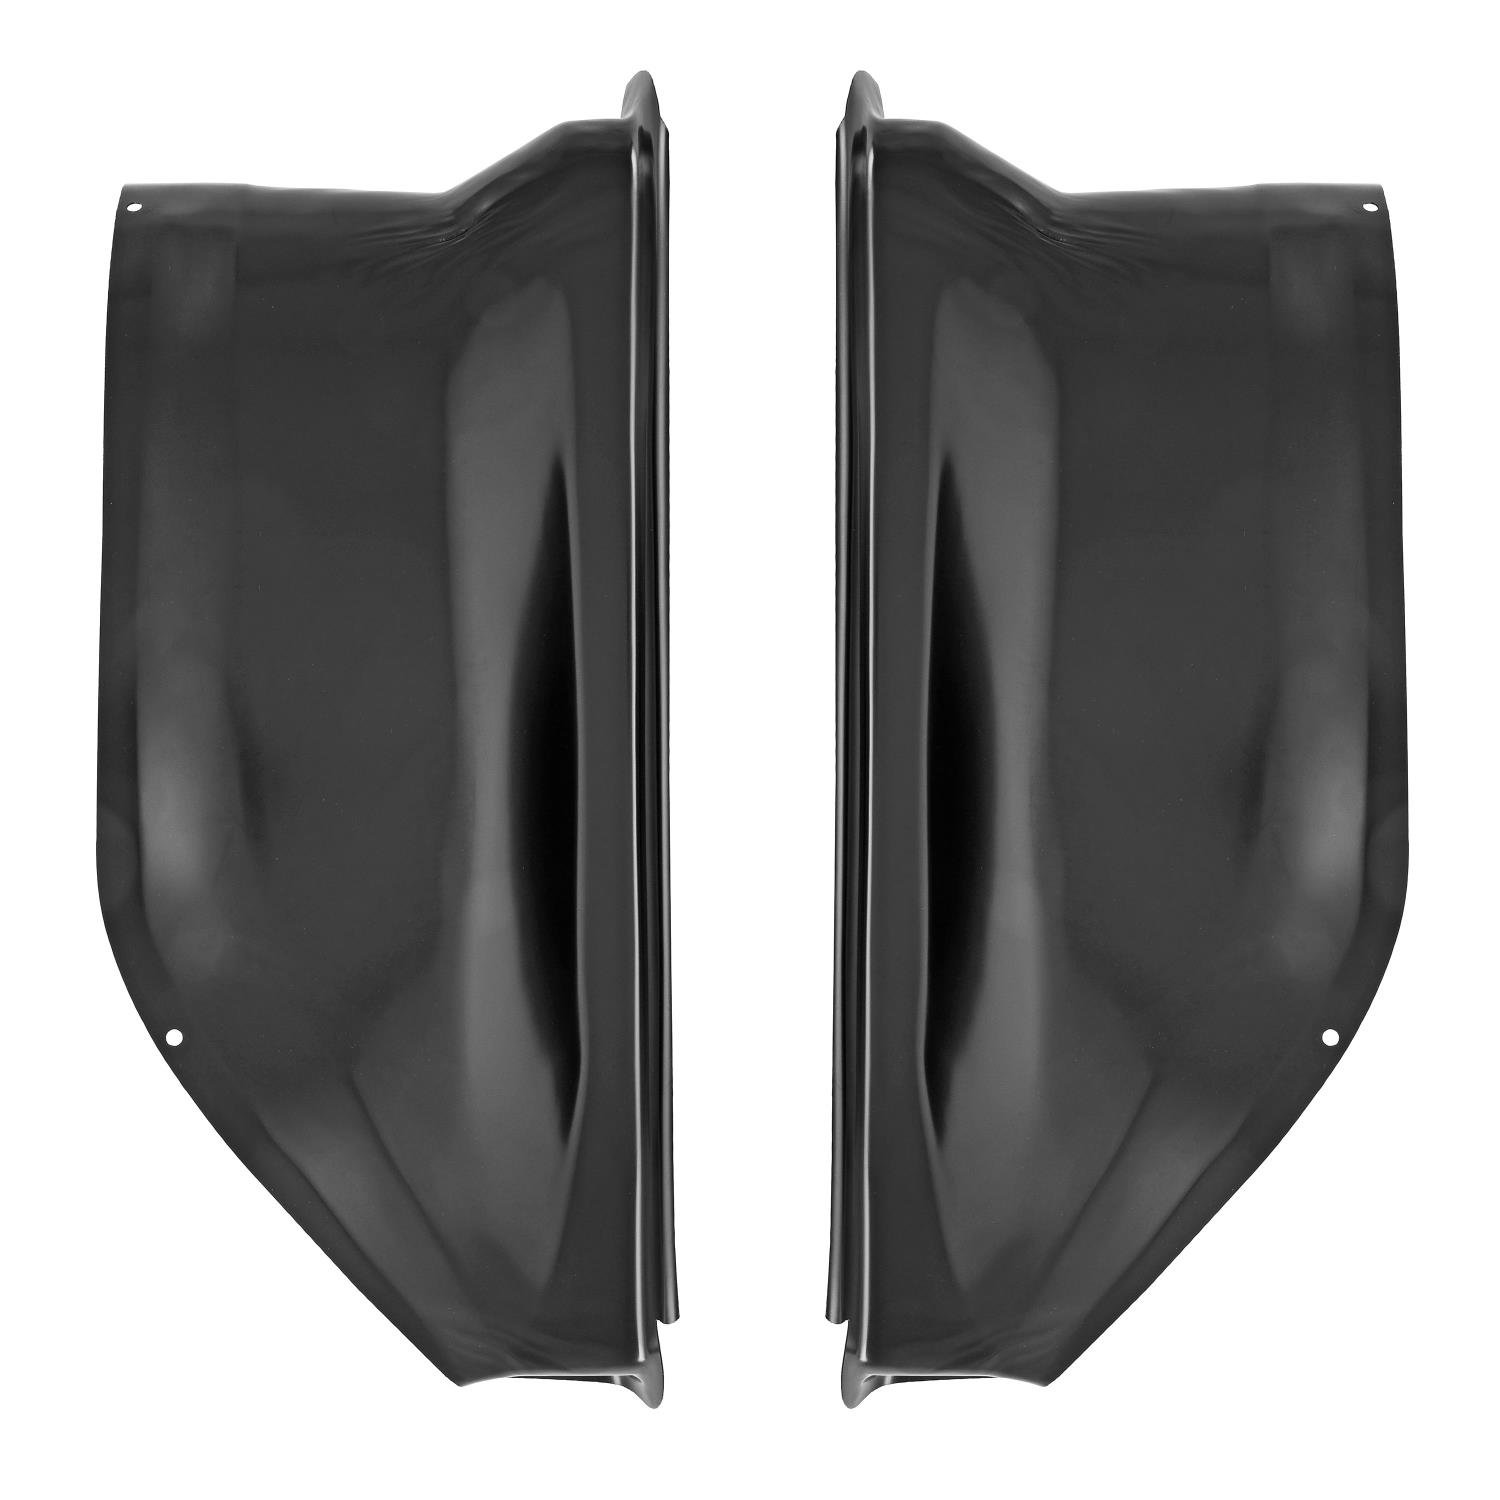 Outer Cowl Panel Kit for Select 1968-1972 Buick,